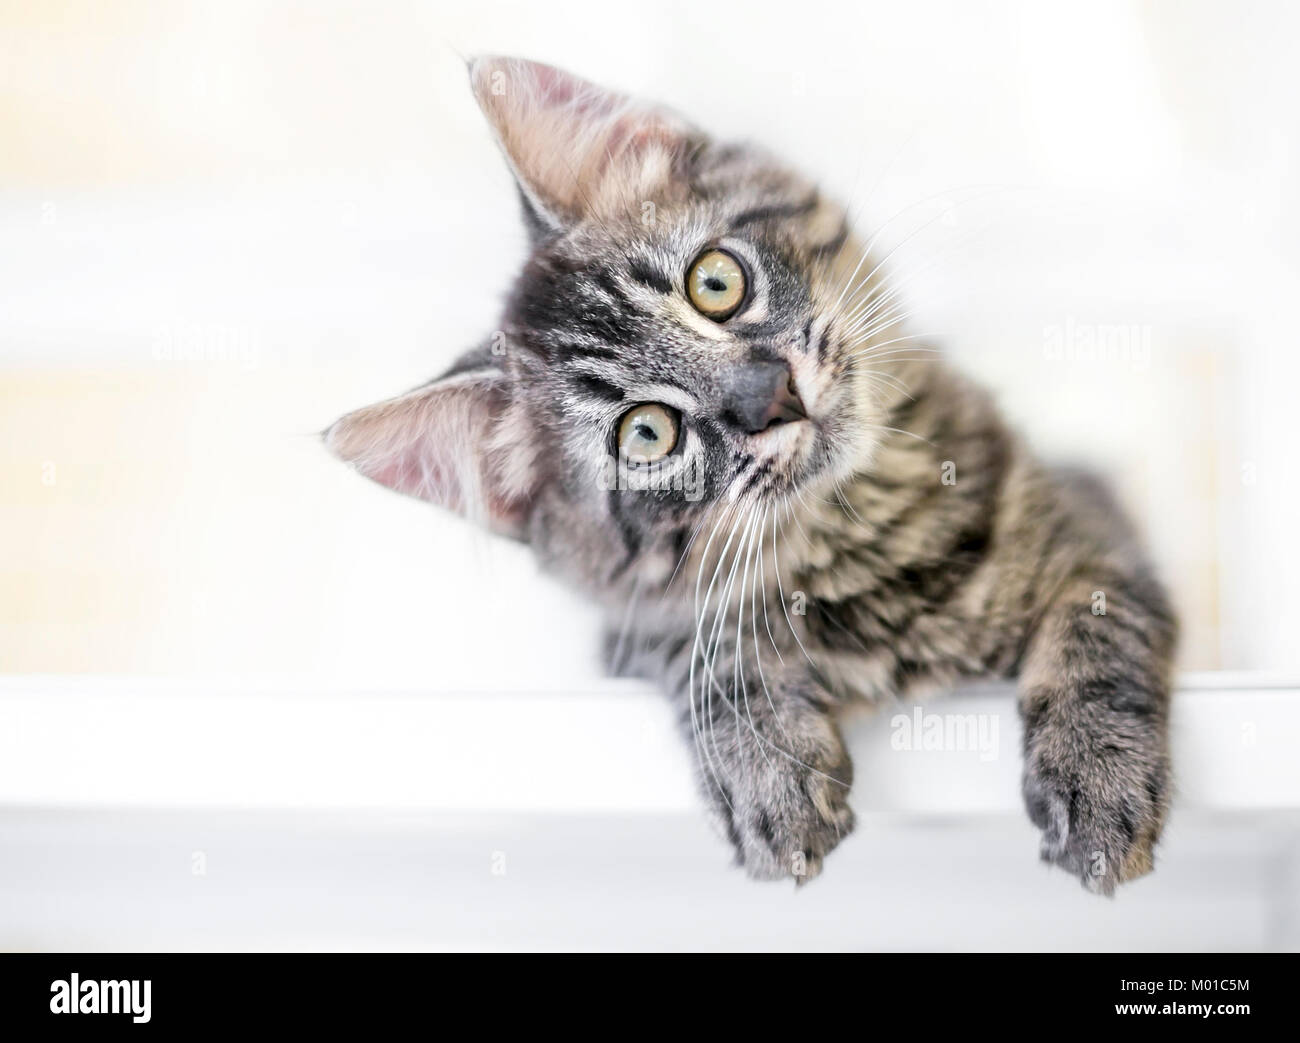 A young kitten gazing at the viewer curiously with a head tilt Stock Photo